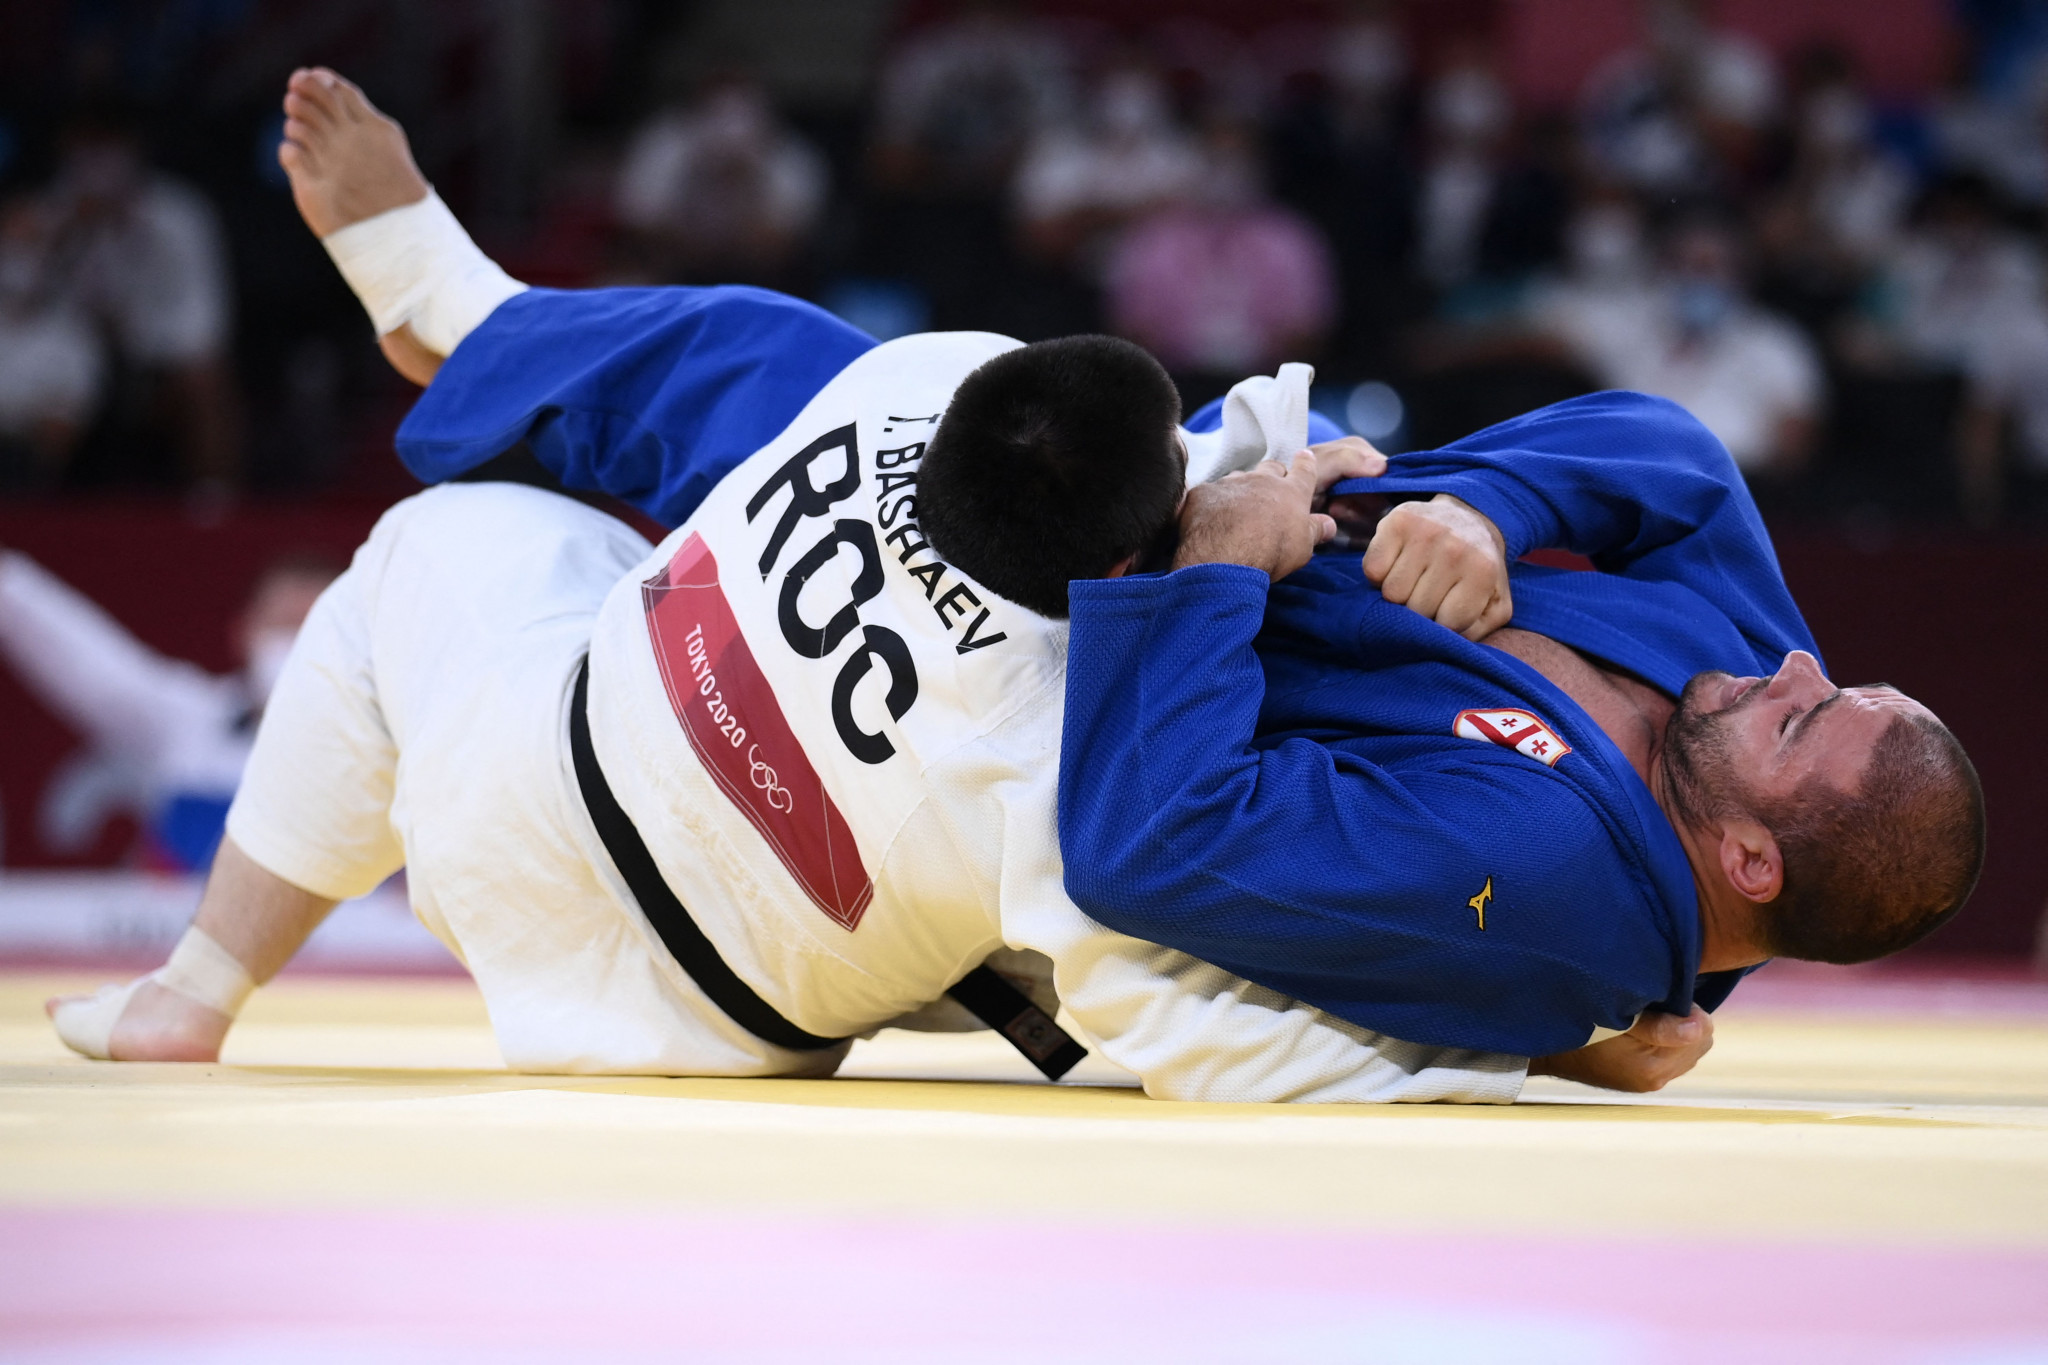 IJF decision to allow return of Russians as neutrals leaves Ukraine participation at World Championships in doubt